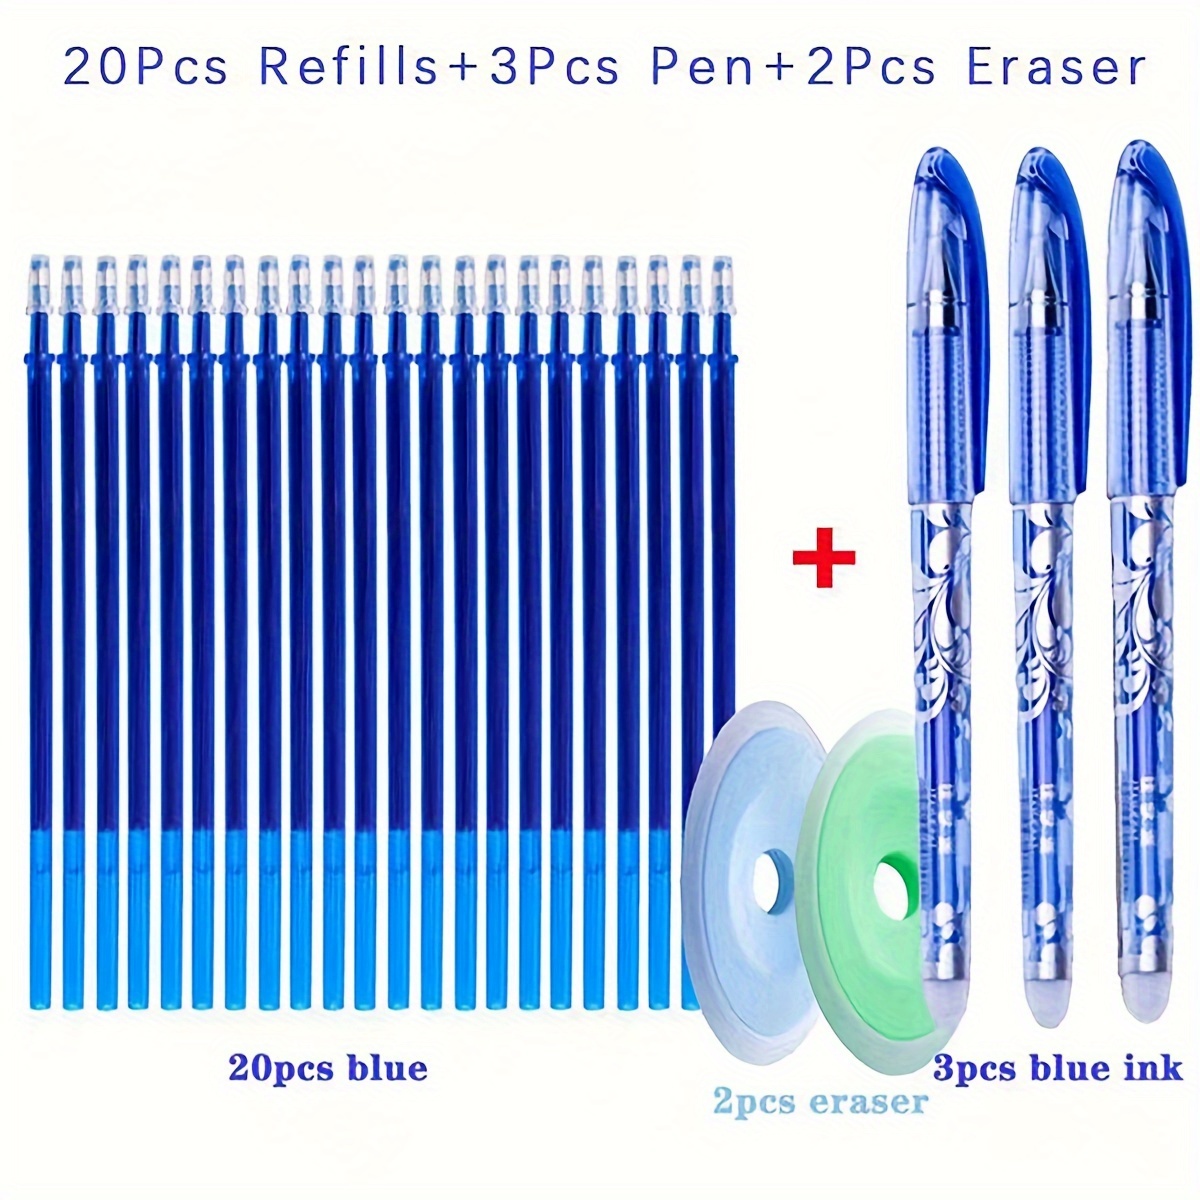 

Erasable Ballpoint Pen Set With 20 Refills, 3 Pens, And 2 Erasers - Plastic 0.5mm Micro Point Oval Body Pens With Click-off Cap - Suitable For Ages 3+